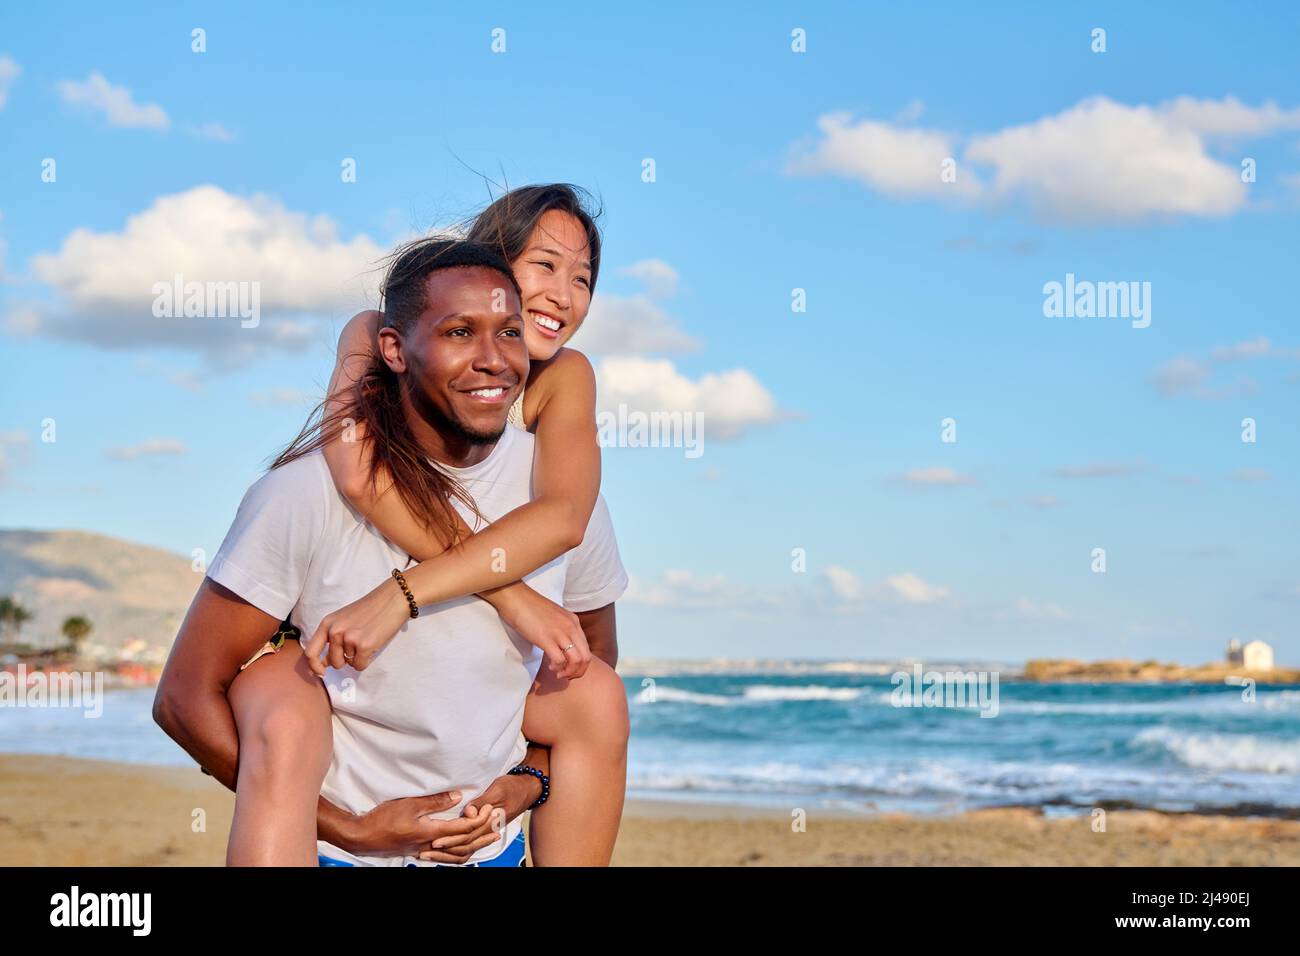 Happy young beautiful couple having fun on the beach, copy space Stock Photo